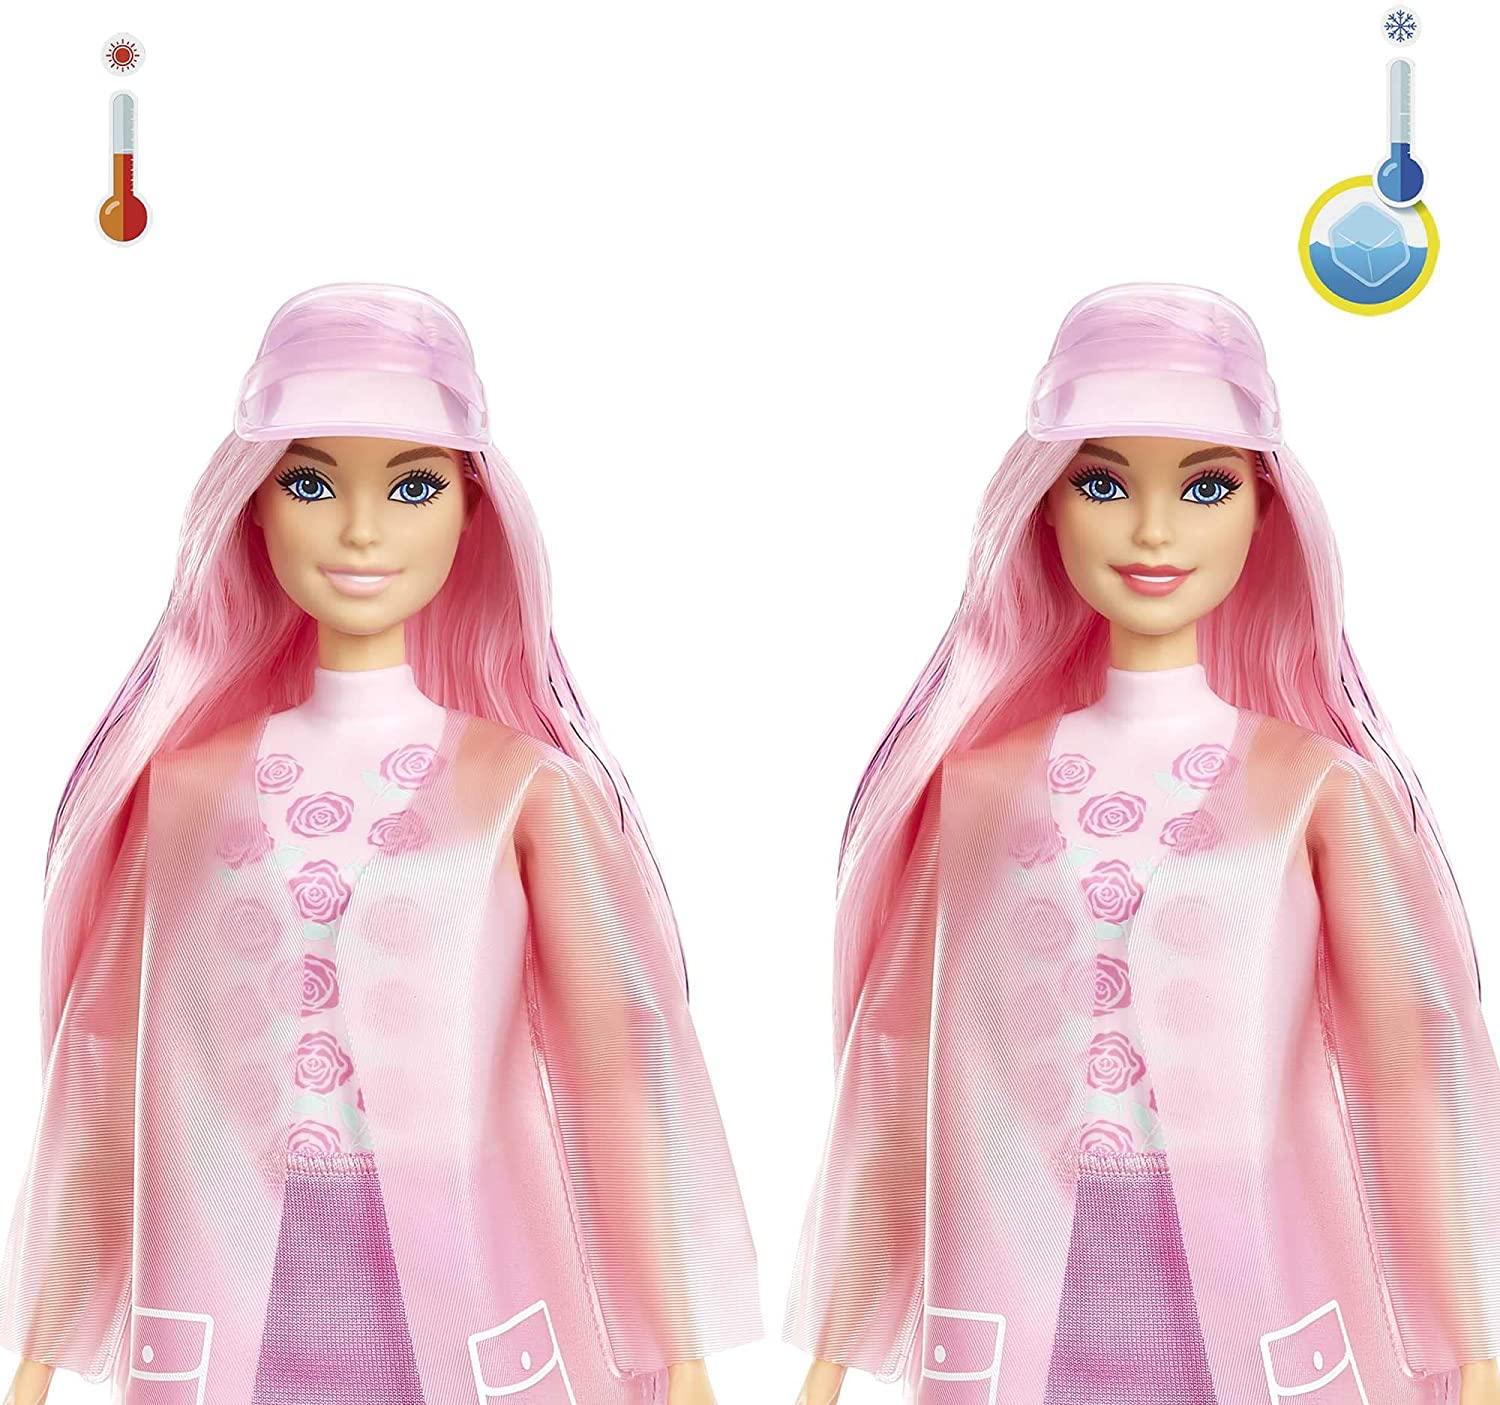 Barbie Color Reveal Doll with 7 Surprises [Styles May Vary]: 4